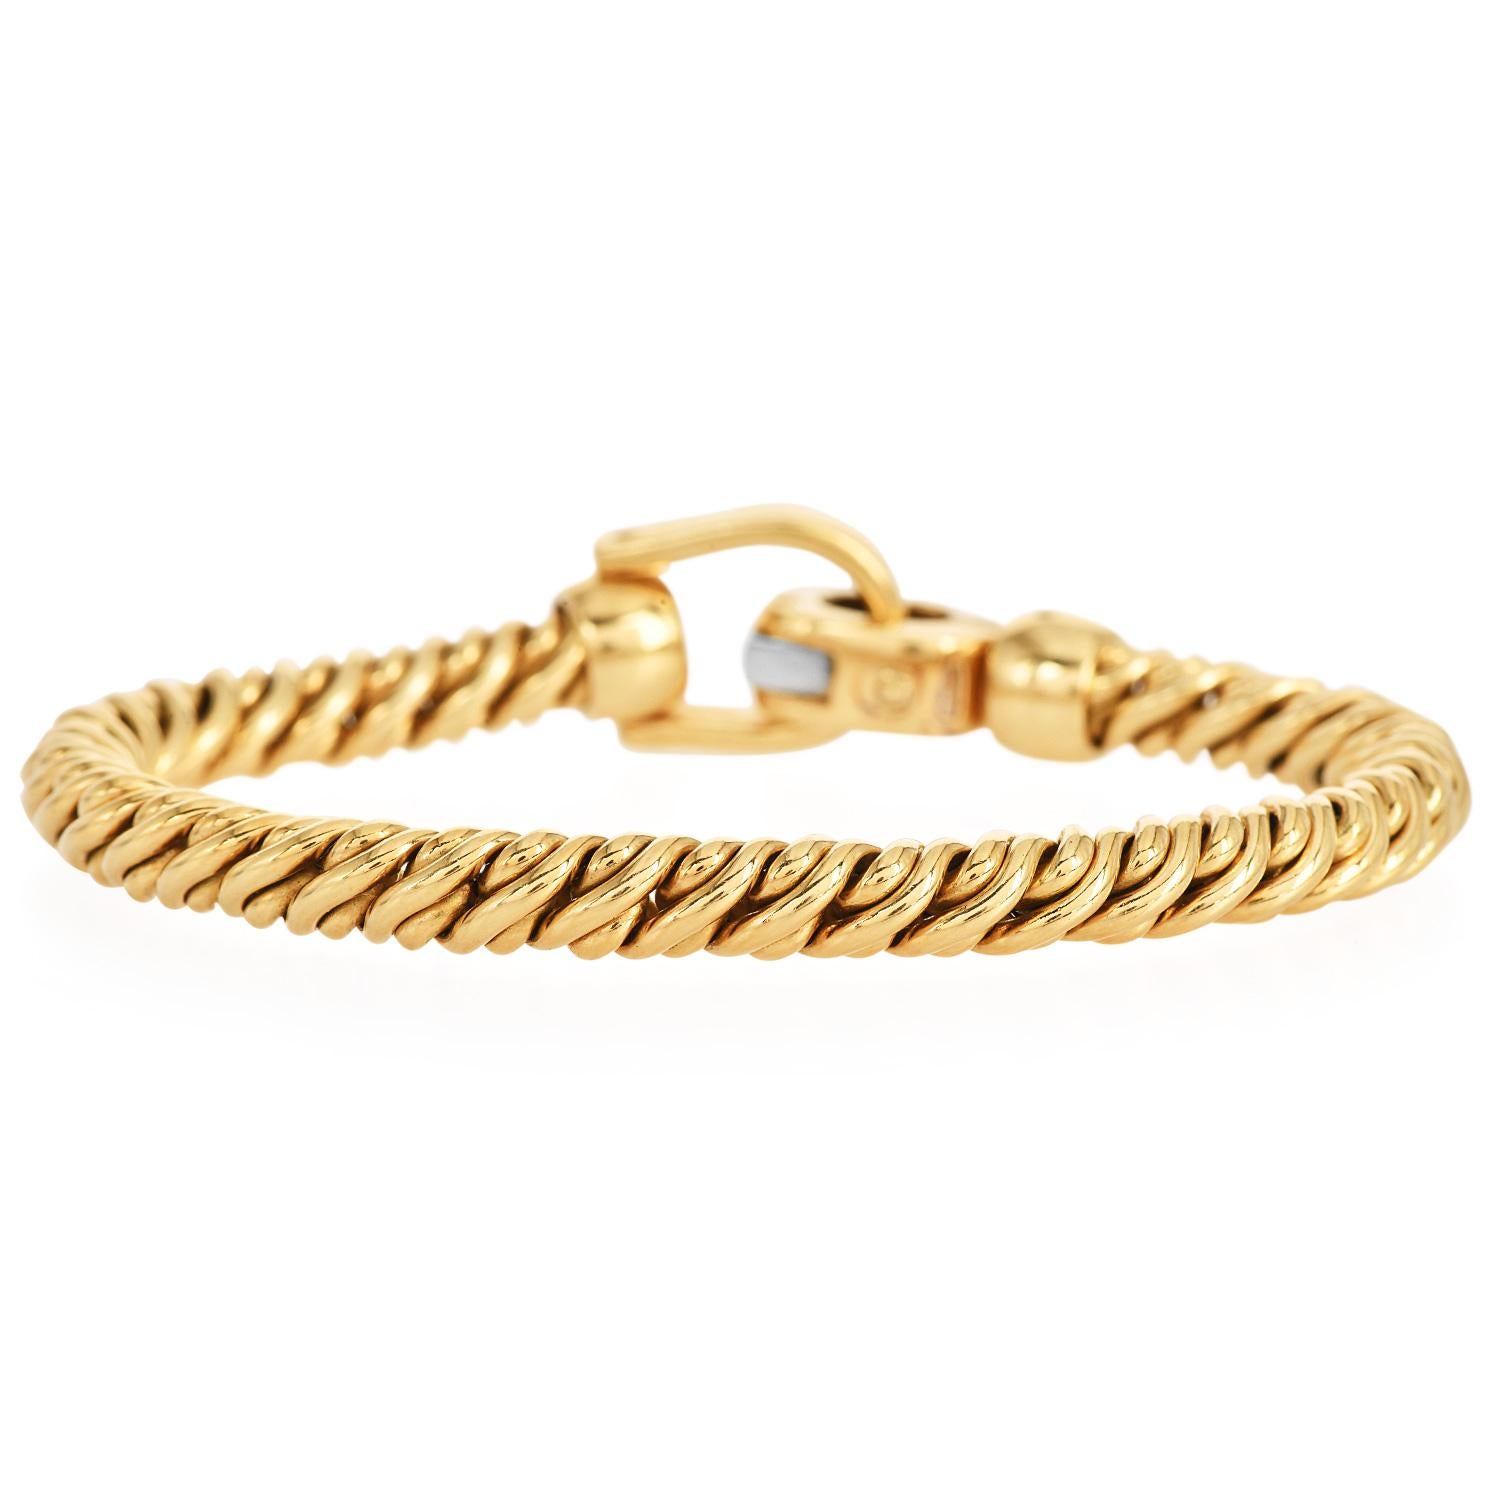 Pomellato Diamond 18K Gold Rope Chain Hardware Link Bracelet

Presenting a beautiful Wide Bracelet forged in 18K Yellow and white gold. The bracelet has a natural diamond Prong set in White gold. 

Secured with a fold-over Jewelry Clasp. 

Metal: